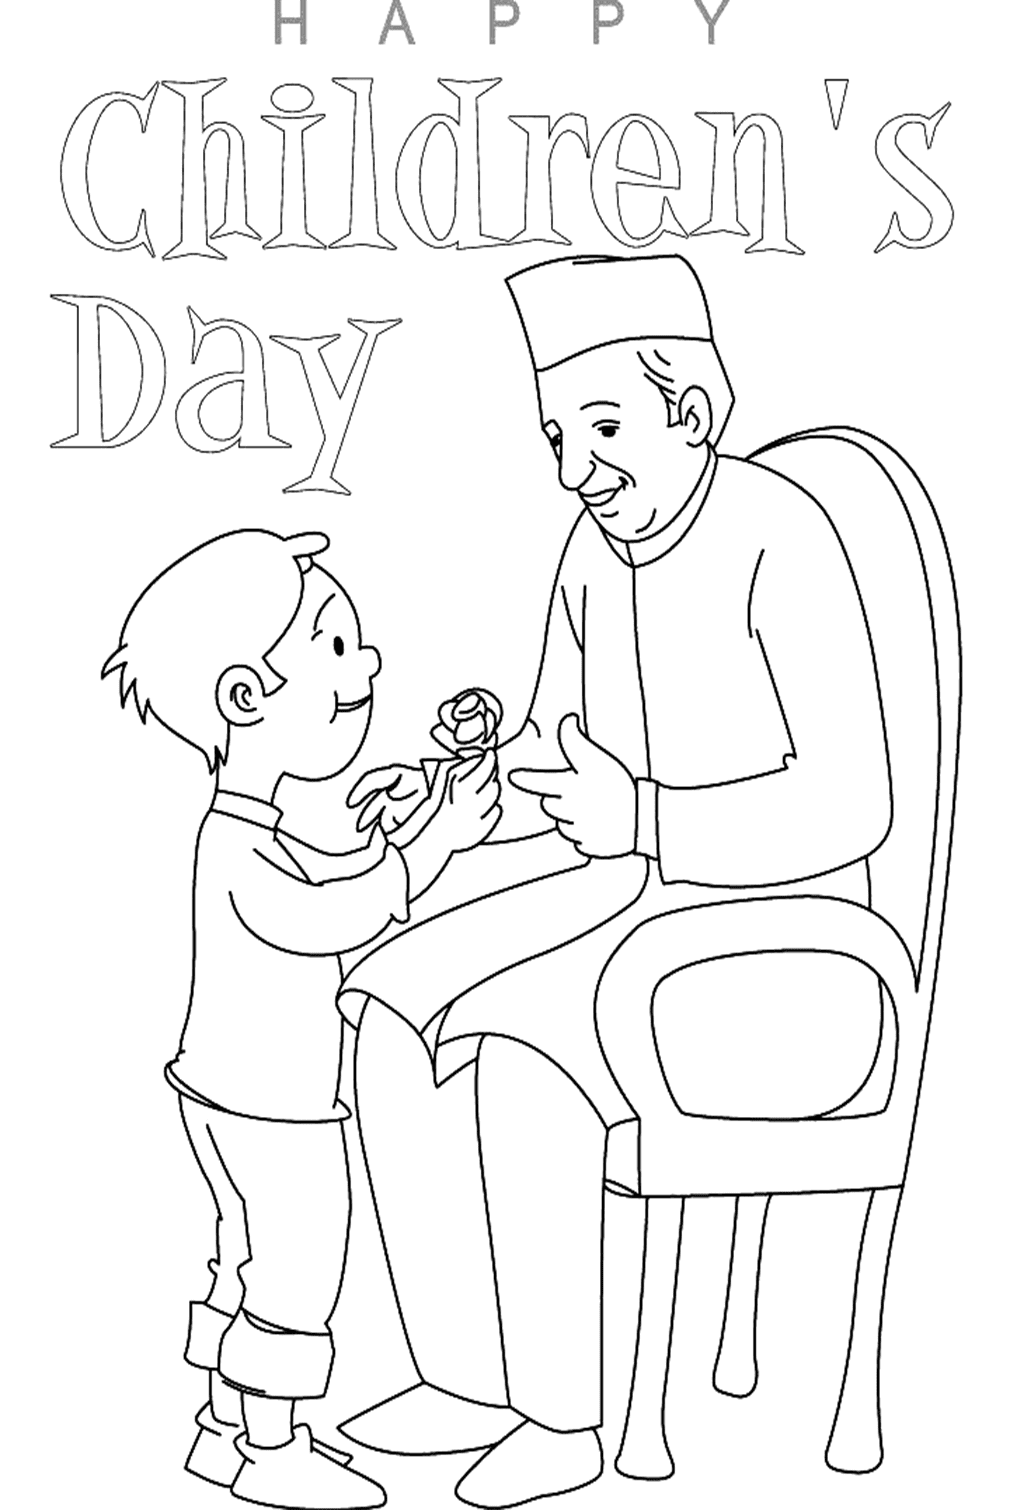 Kid’s Paying Homage To Nehru Coloring Page